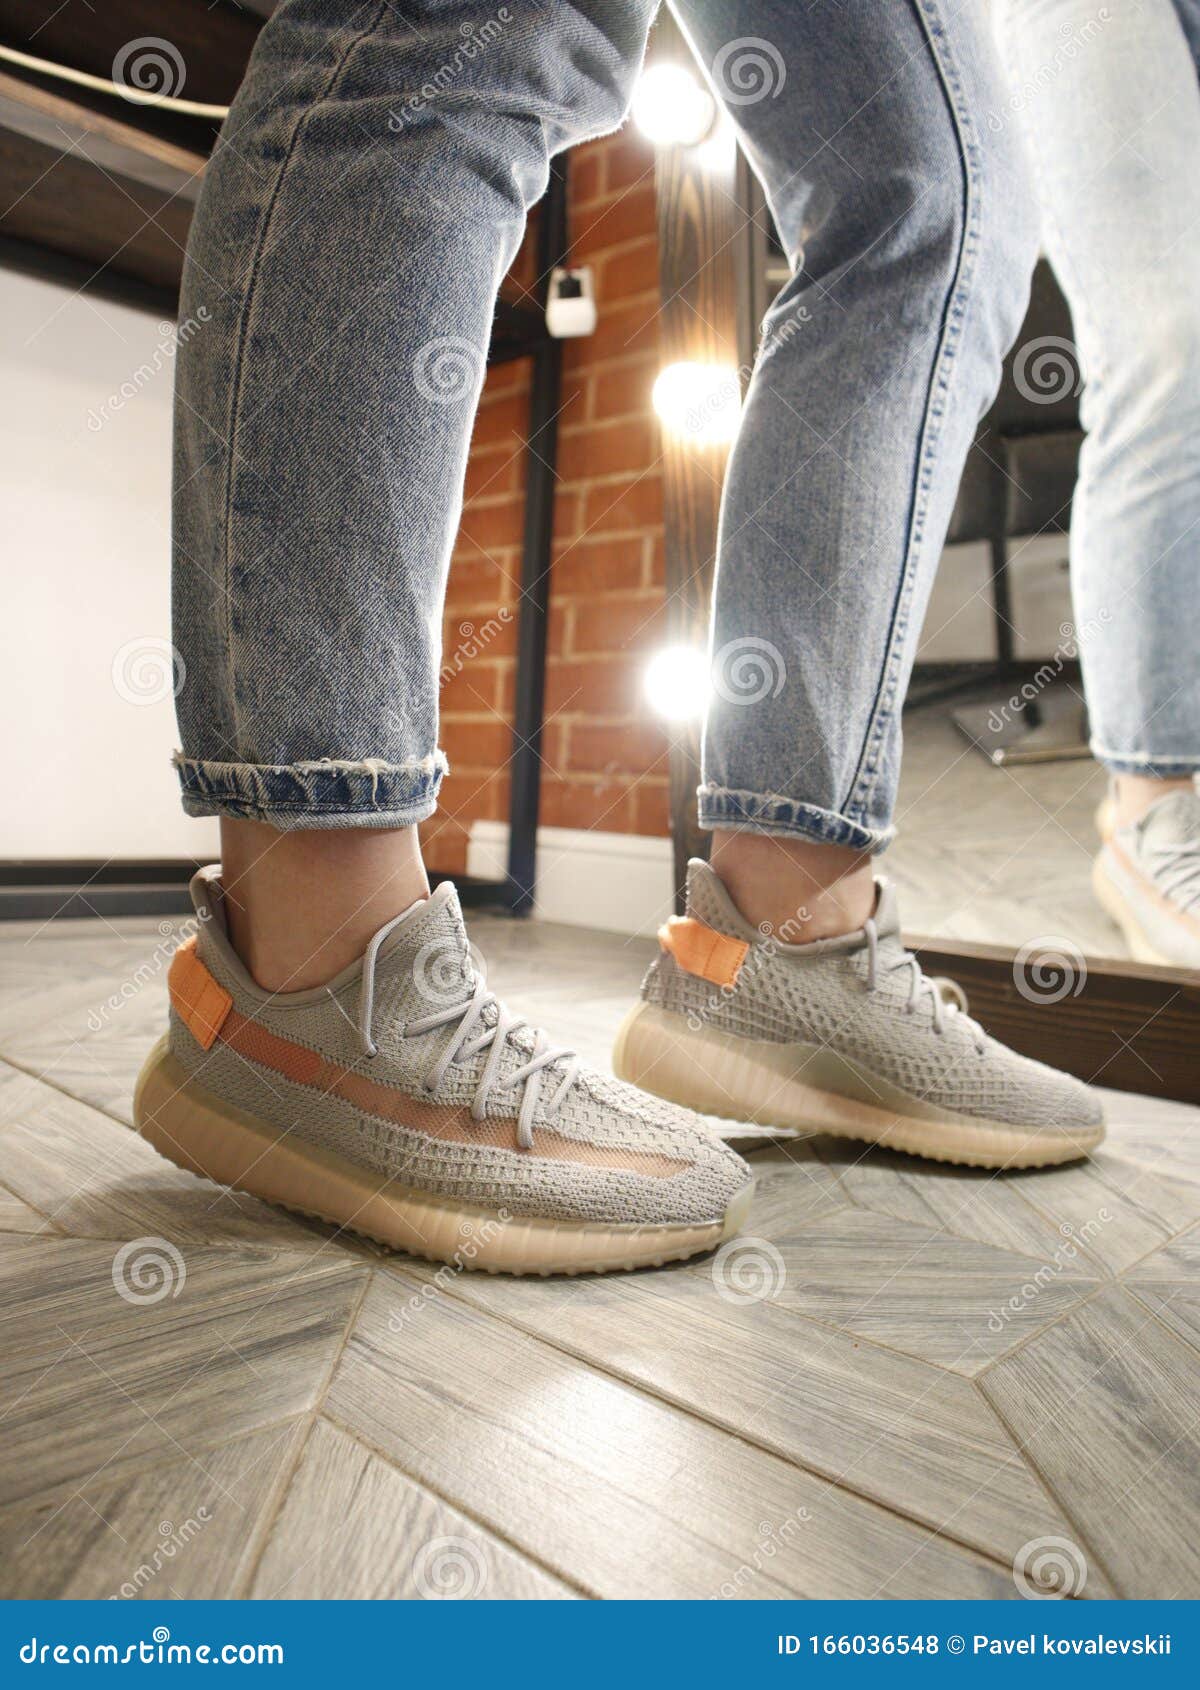 yeezy 350 with jeans